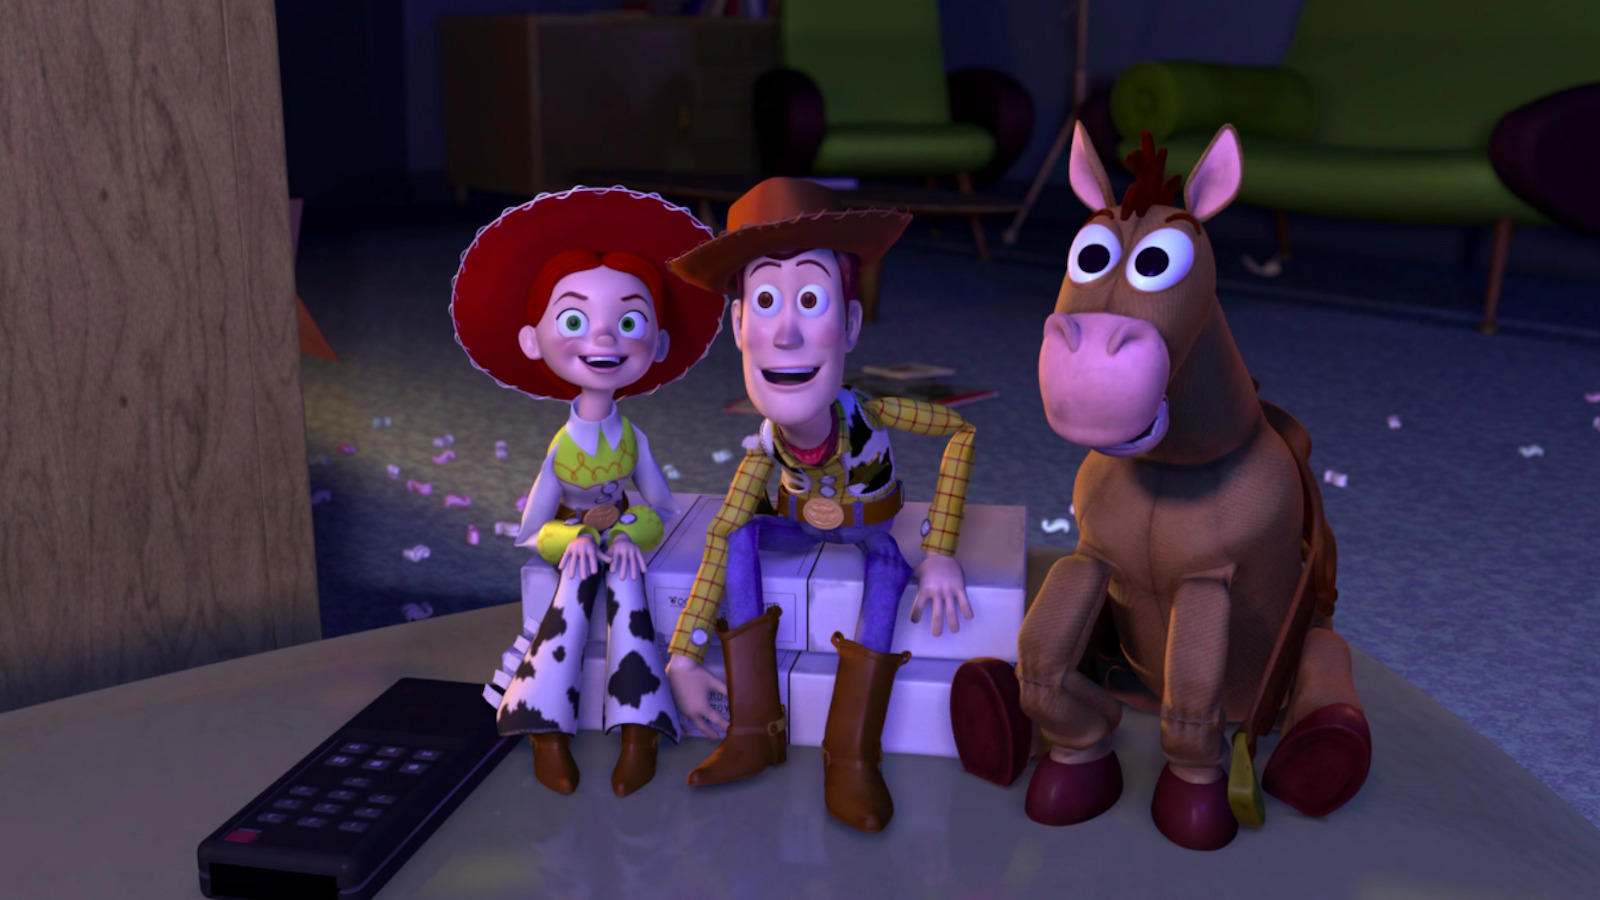 Toy Story 2 Gallery